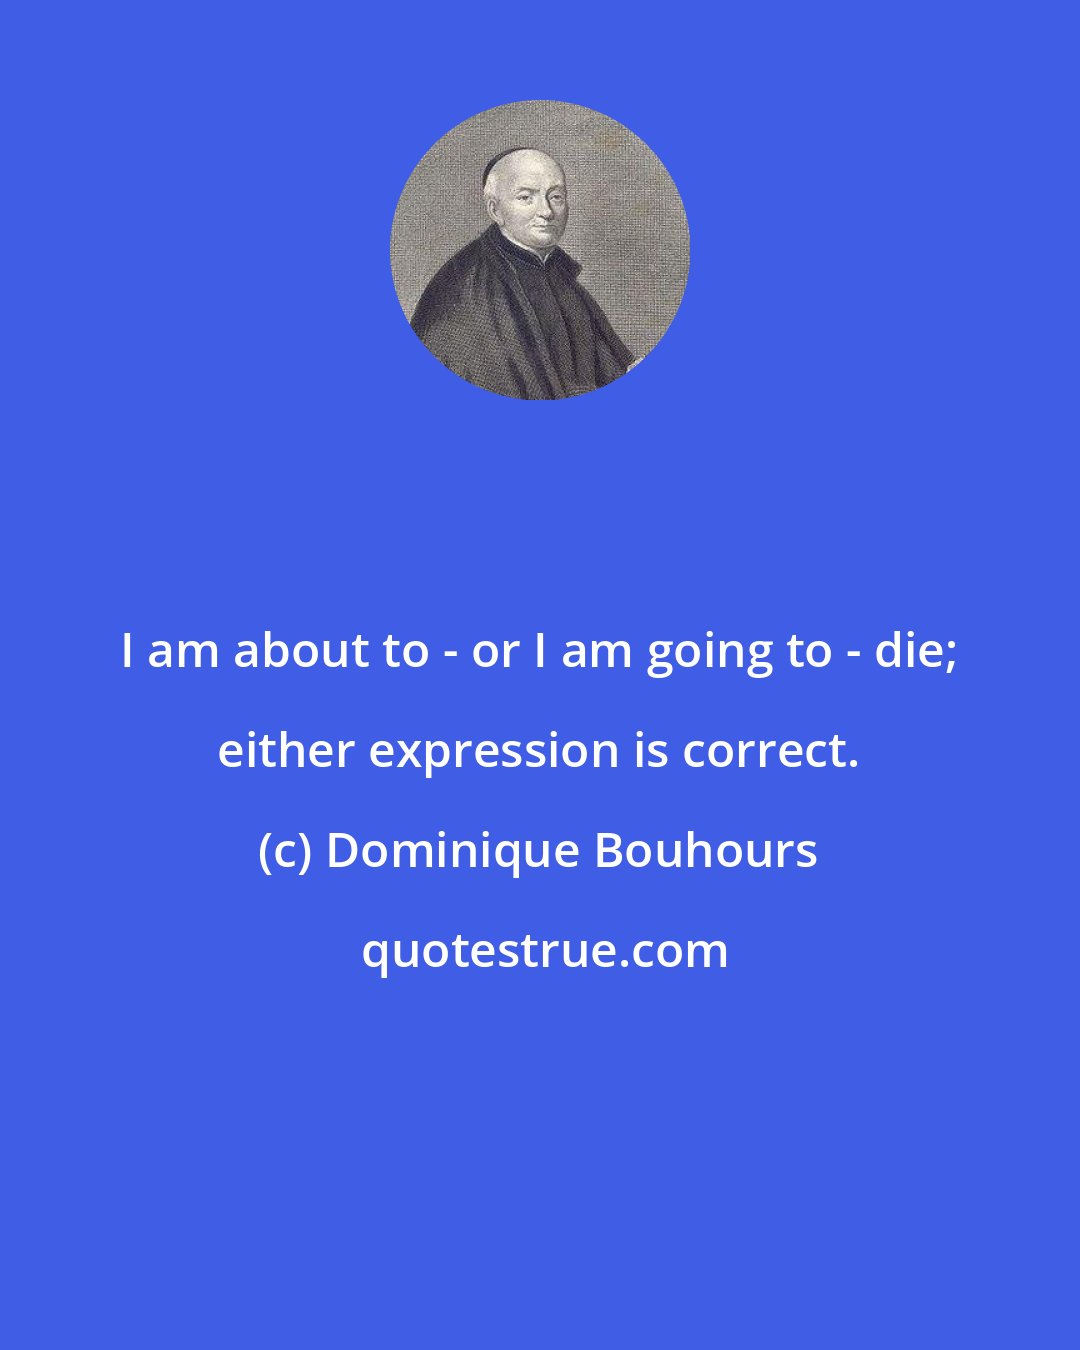 Dominique Bouhours: I am about to - or I am going to - die; either expression is correct.